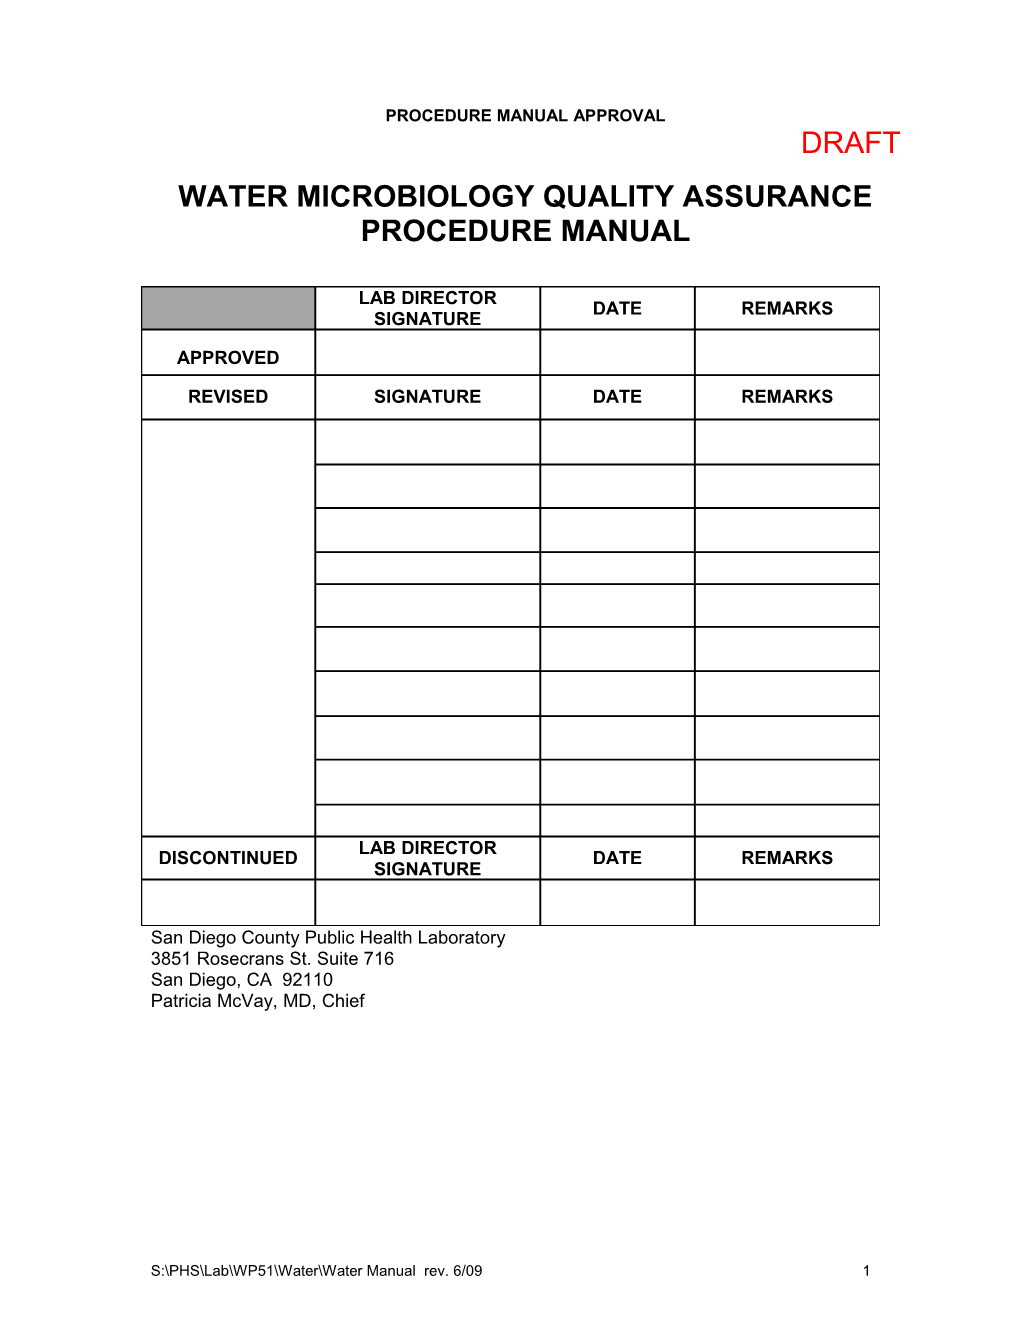 Water Microbiology Quality Assurance Procedure Manual